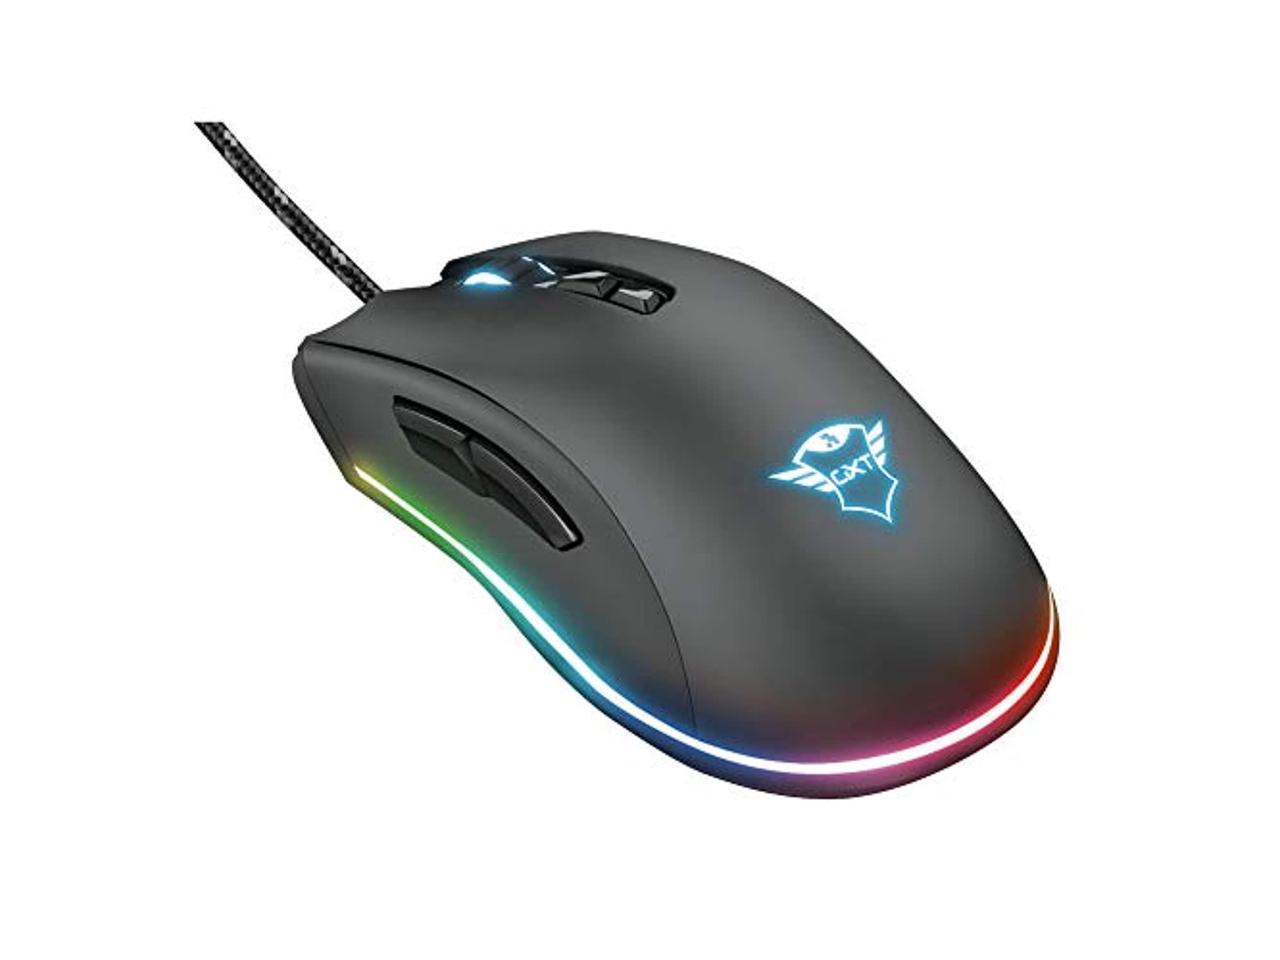 Mouse Double click.